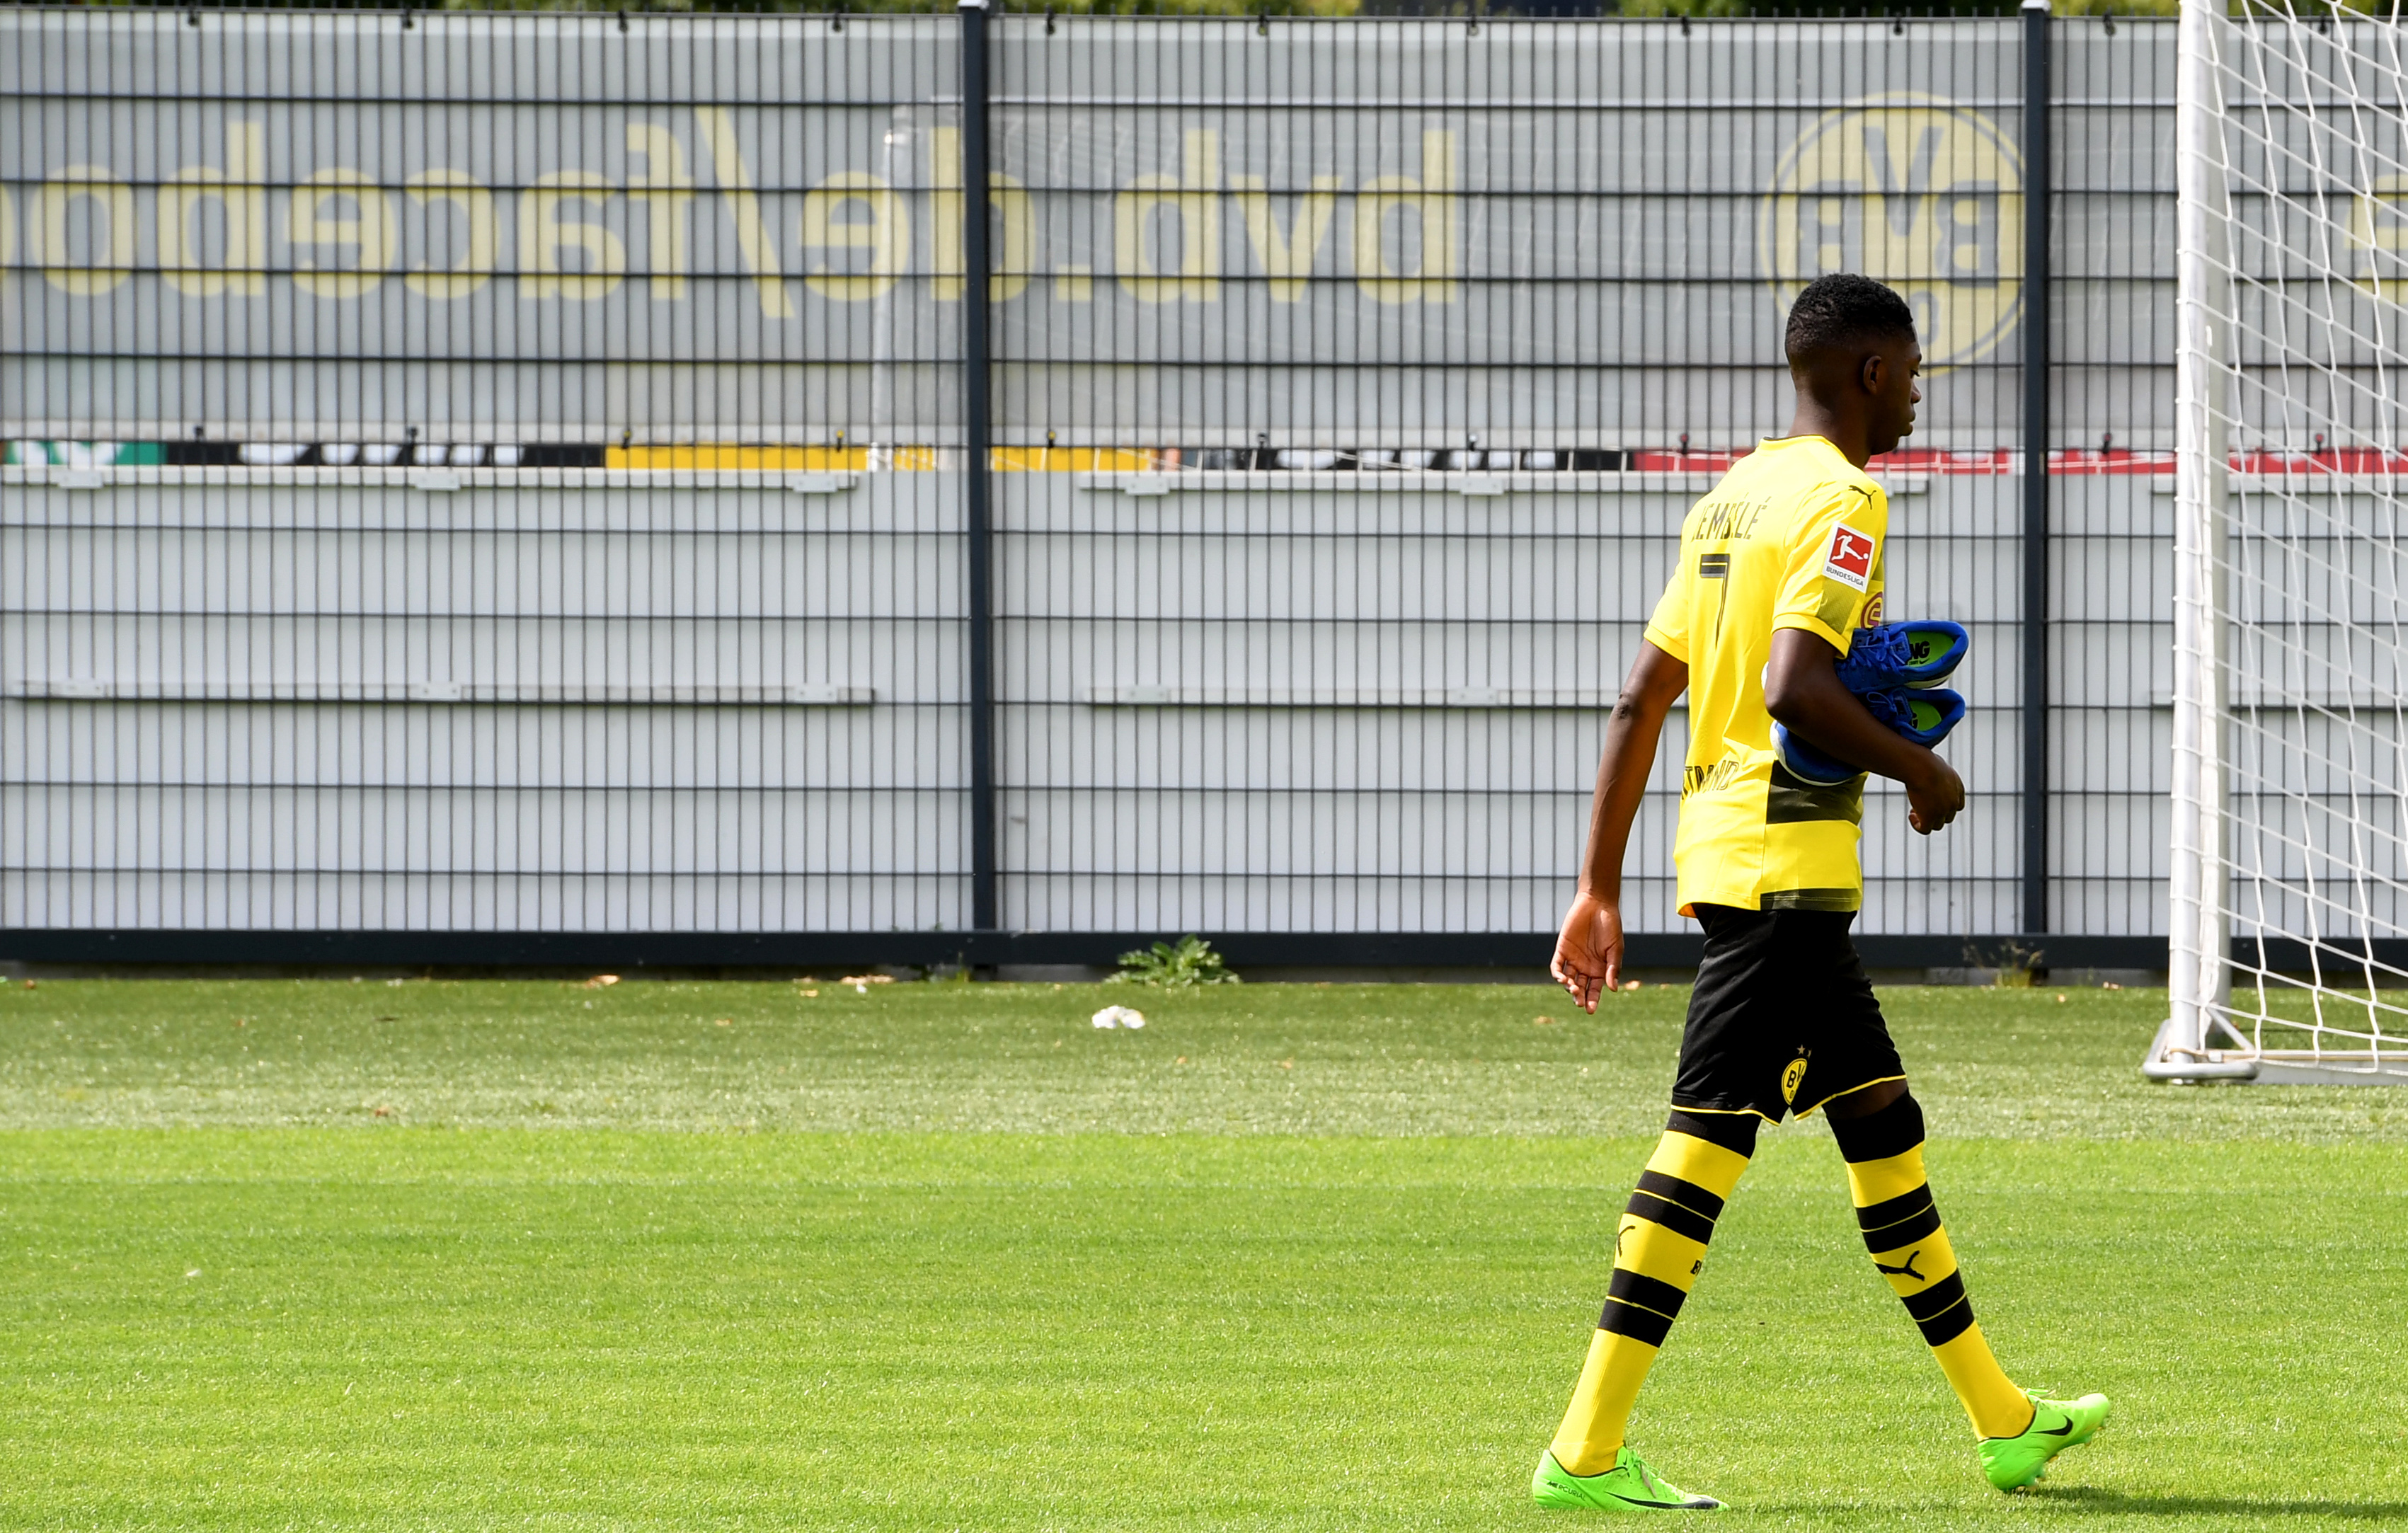 Dortmund's French midfielder Ousmane Dembele walks over the pitch during a press event of German first division Bundesliga football club Borussia Dortmund on August 9, 2017 in Dortmund, western Germany. / AFP PHOTO / PATRIK STOLLARZ        (Photo credit should read PATRIK STOLLARZ/AFP/Getty Images)